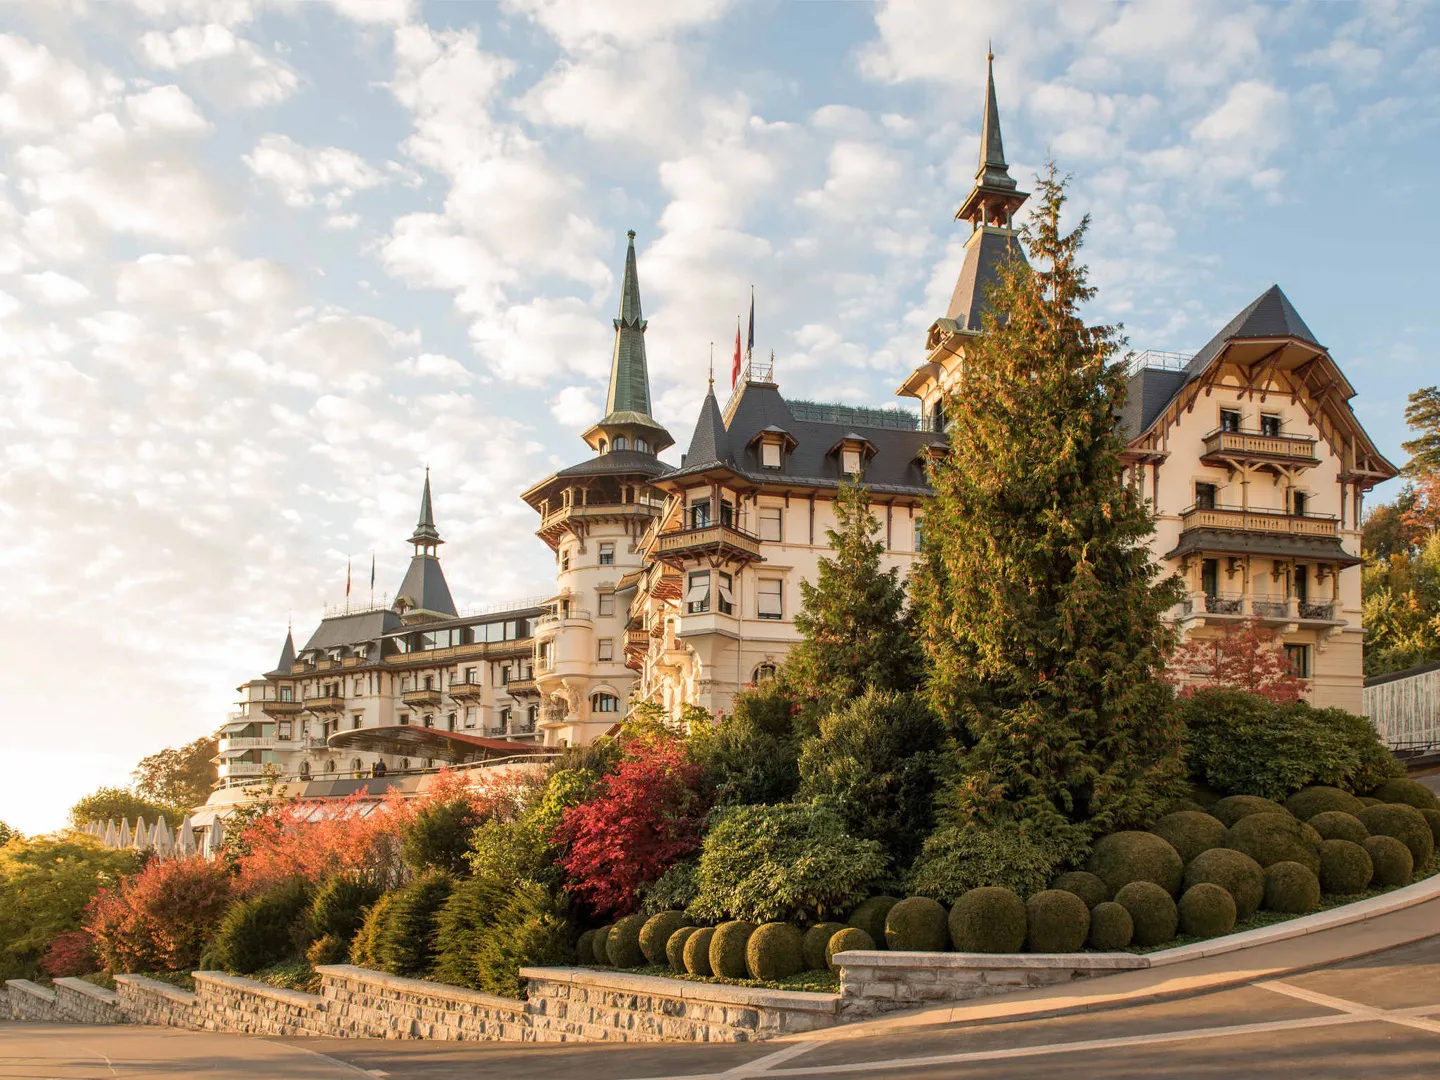 Stay at the stunning luxury five-star Dolder Grand hotel in Zurich on a Swiss Alps holiday